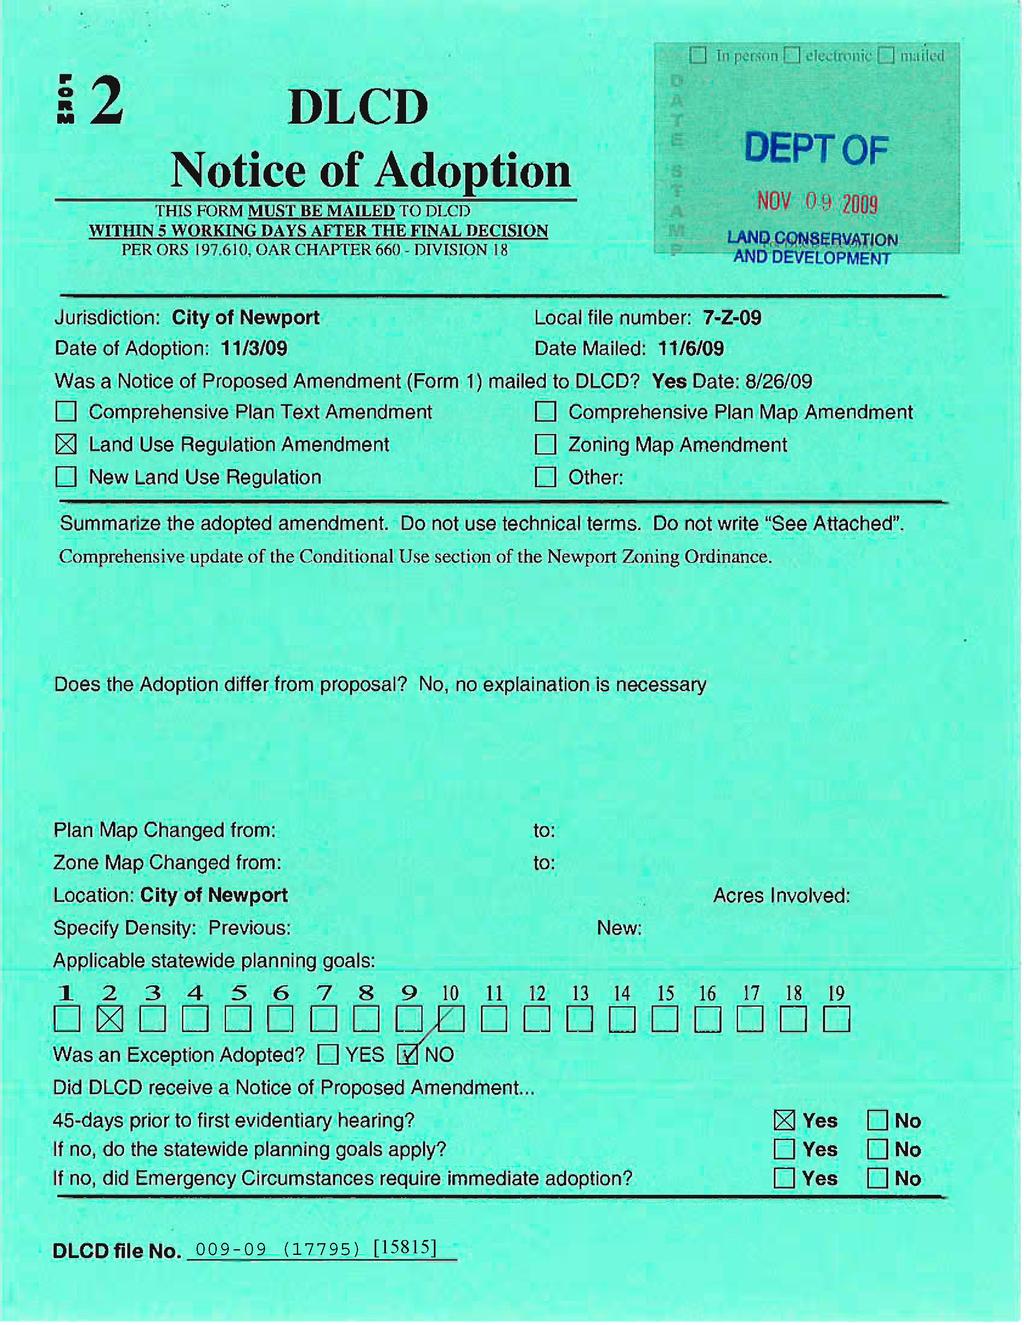 TI a pi rinn,71 ètèt iiv'iiic [ J nwiïcjl 12 DLCD Notice of Adoption i T- DEPTOF MOv o 9 THIS FORM MUST BE MAILED TO DLCD WITHIN 5 WORKING DAYS AFTER THE FINAL DECISION PER ORS 197.